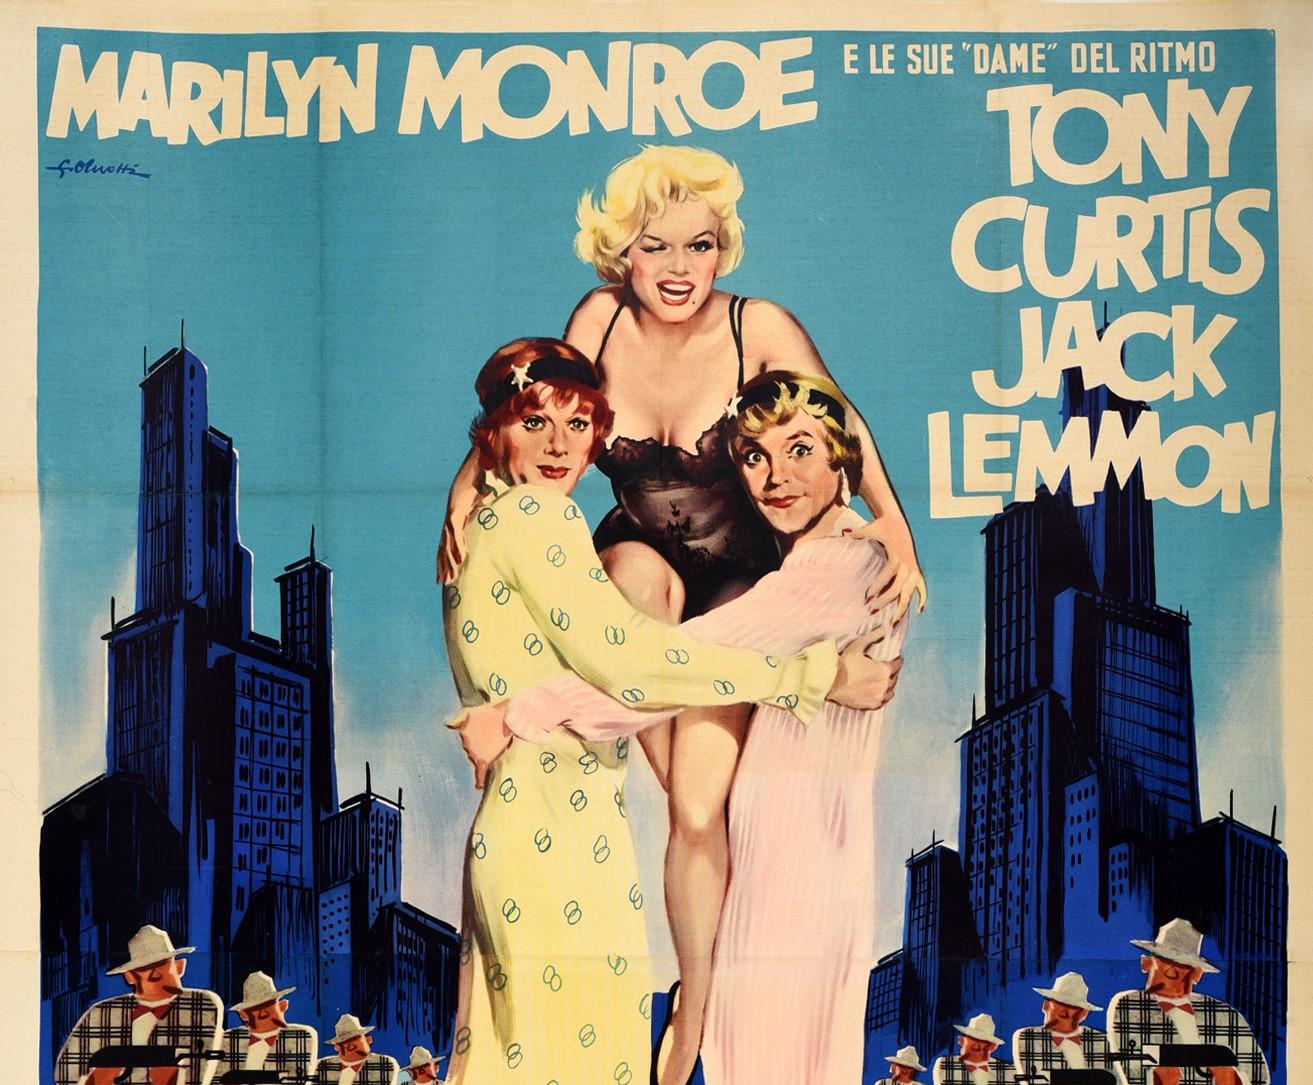 Original vintage Italian 2 panel movie poster for the first release in Italy of the award winning musical comedy film Some Like It Hot / A Qualcuno Piace Caldo directed by Billy Wilder and starring Marilyn Monroe, Tony Curtis and Jack Lemmon. Fun